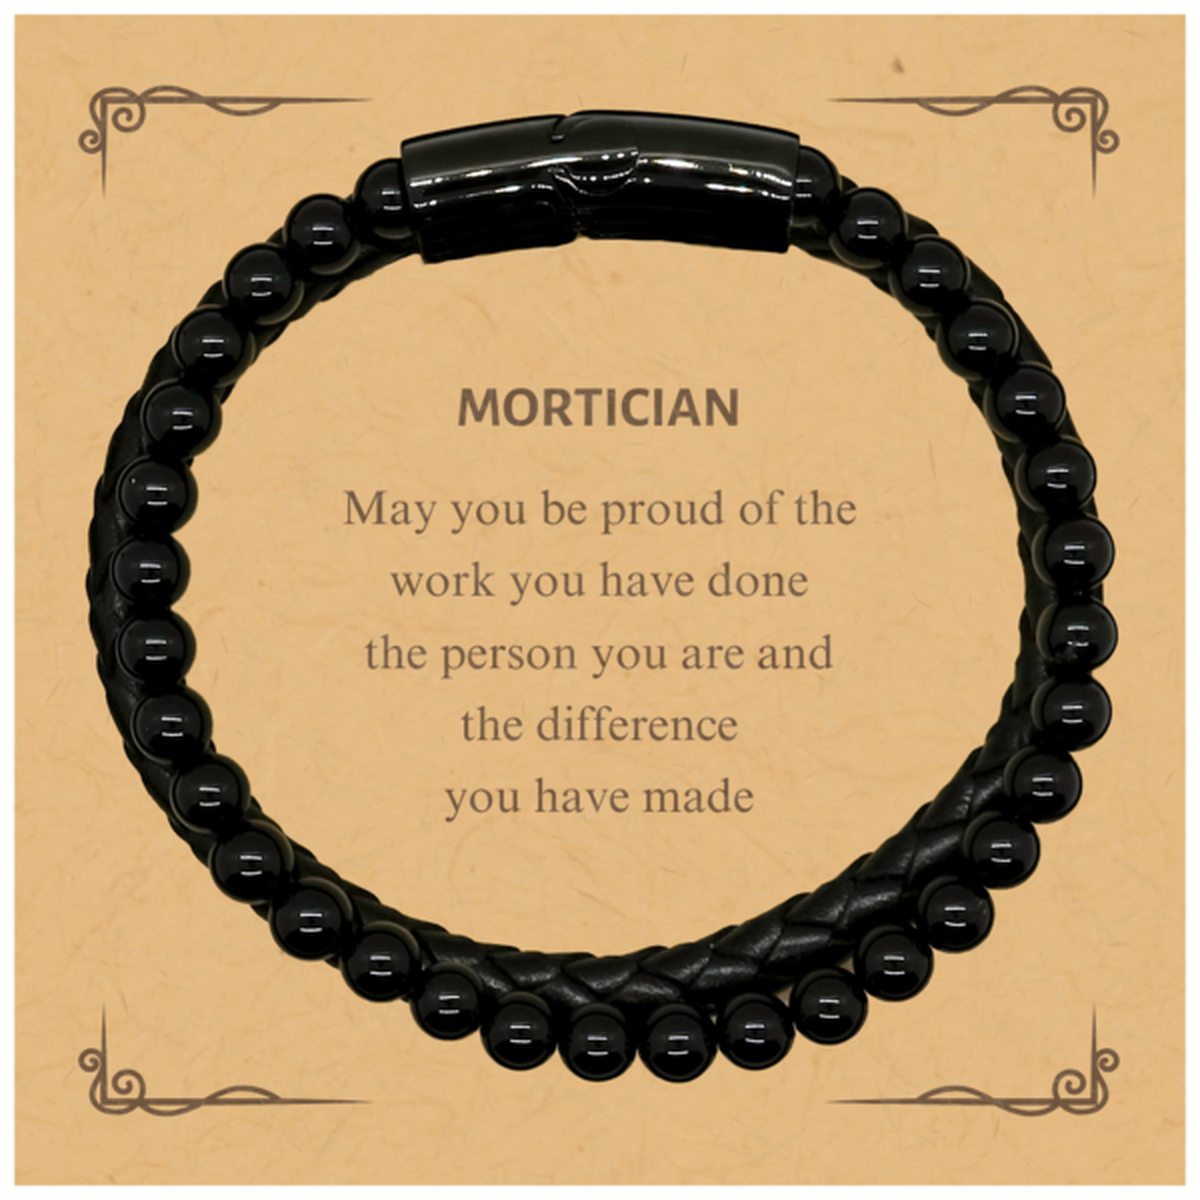 Mortician May you be proud of the work you have done, Retirement Mortician Stone Leather Bracelets for Colleague Appreciation Gifts Amazing for Mortician